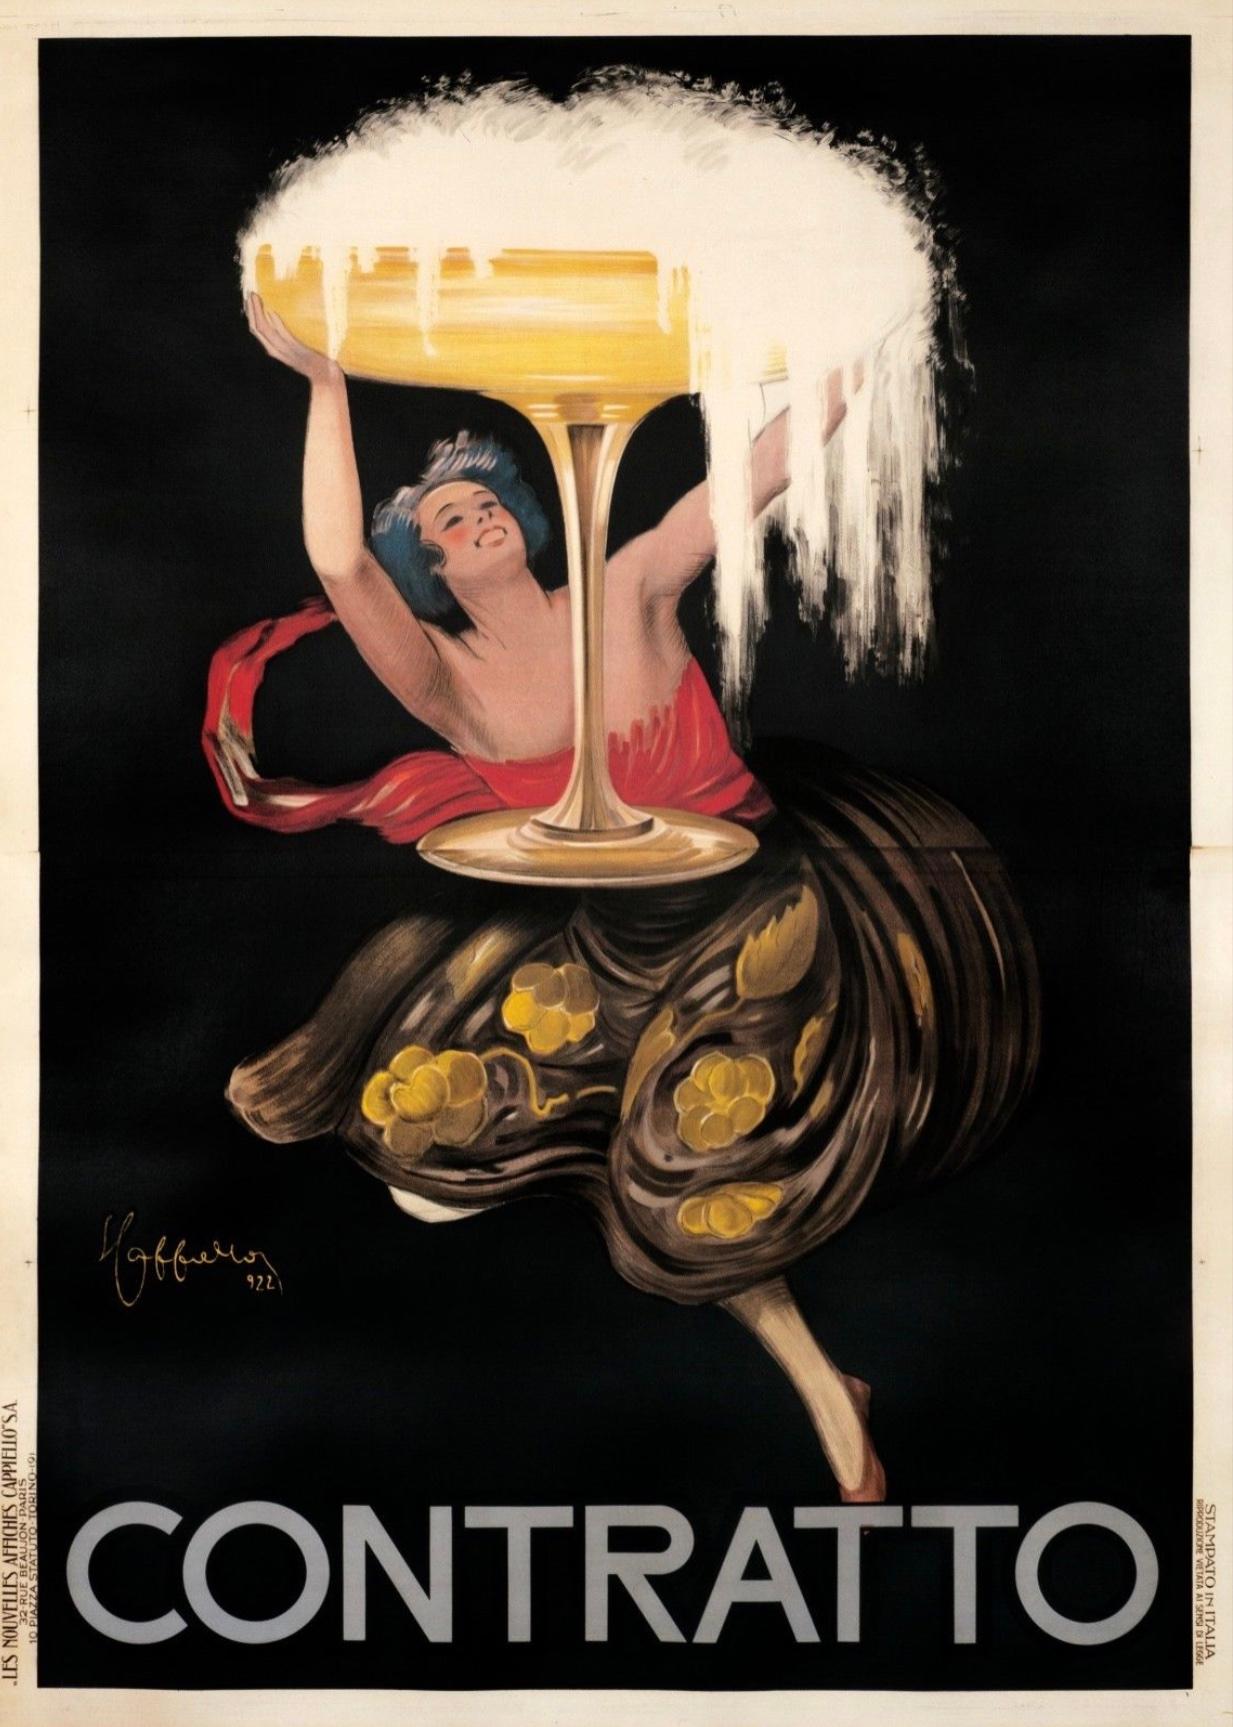 'CONTRATTO ' Origina Vintage Art Deco Advertising Poster by CAPPIELLO, 1930

Elegant, classic, and decedent are just a few words to describe Leonetto Cappiello’s work. In this image, with the stark background, we see a whimsical figure holding an